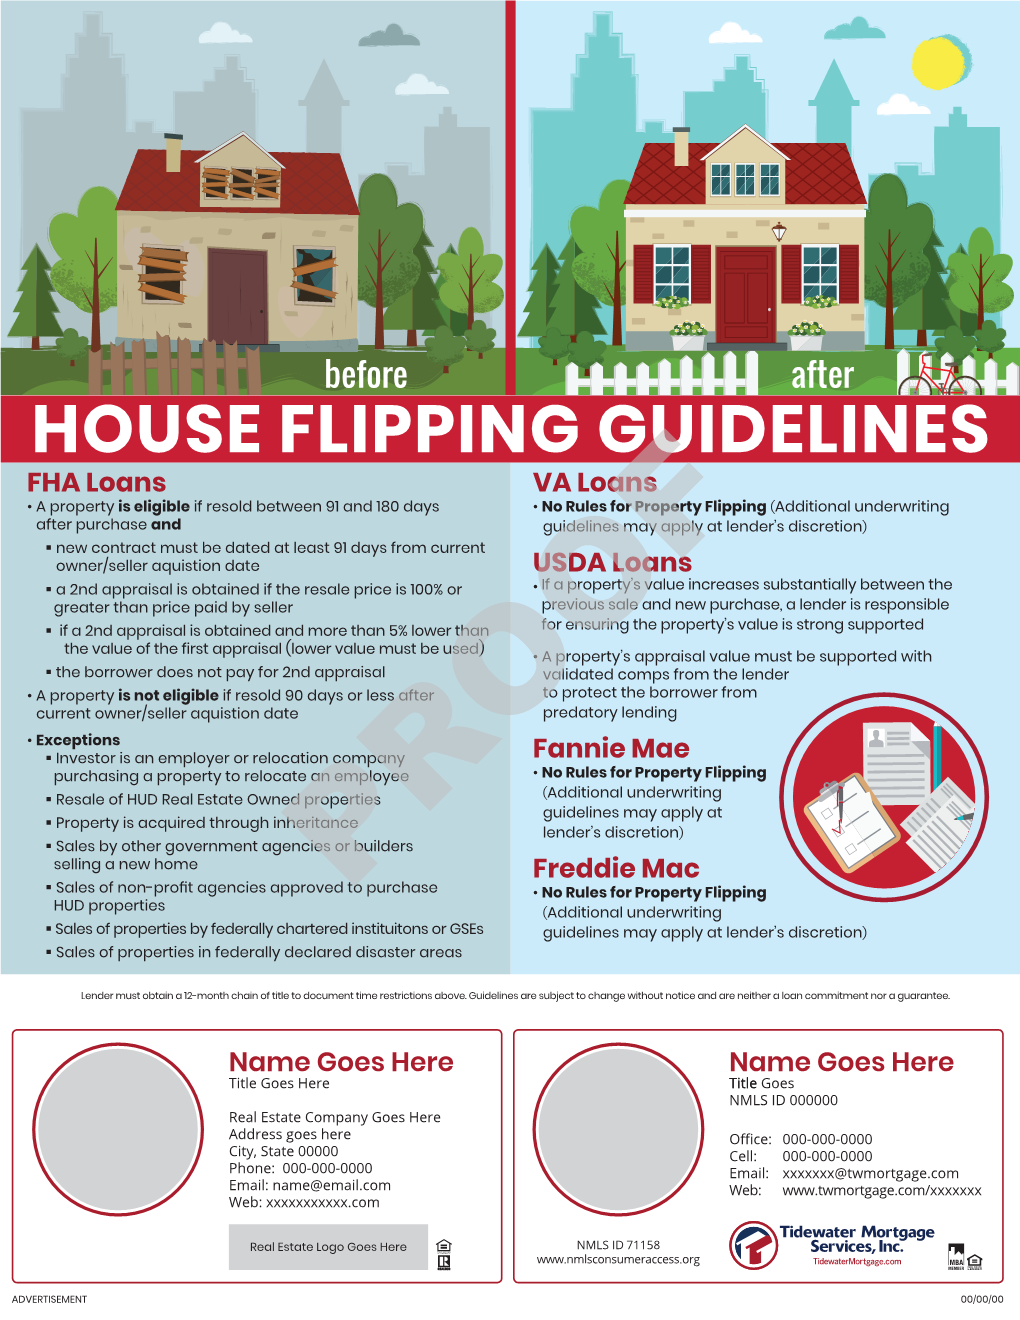 House Flipping Guidelines